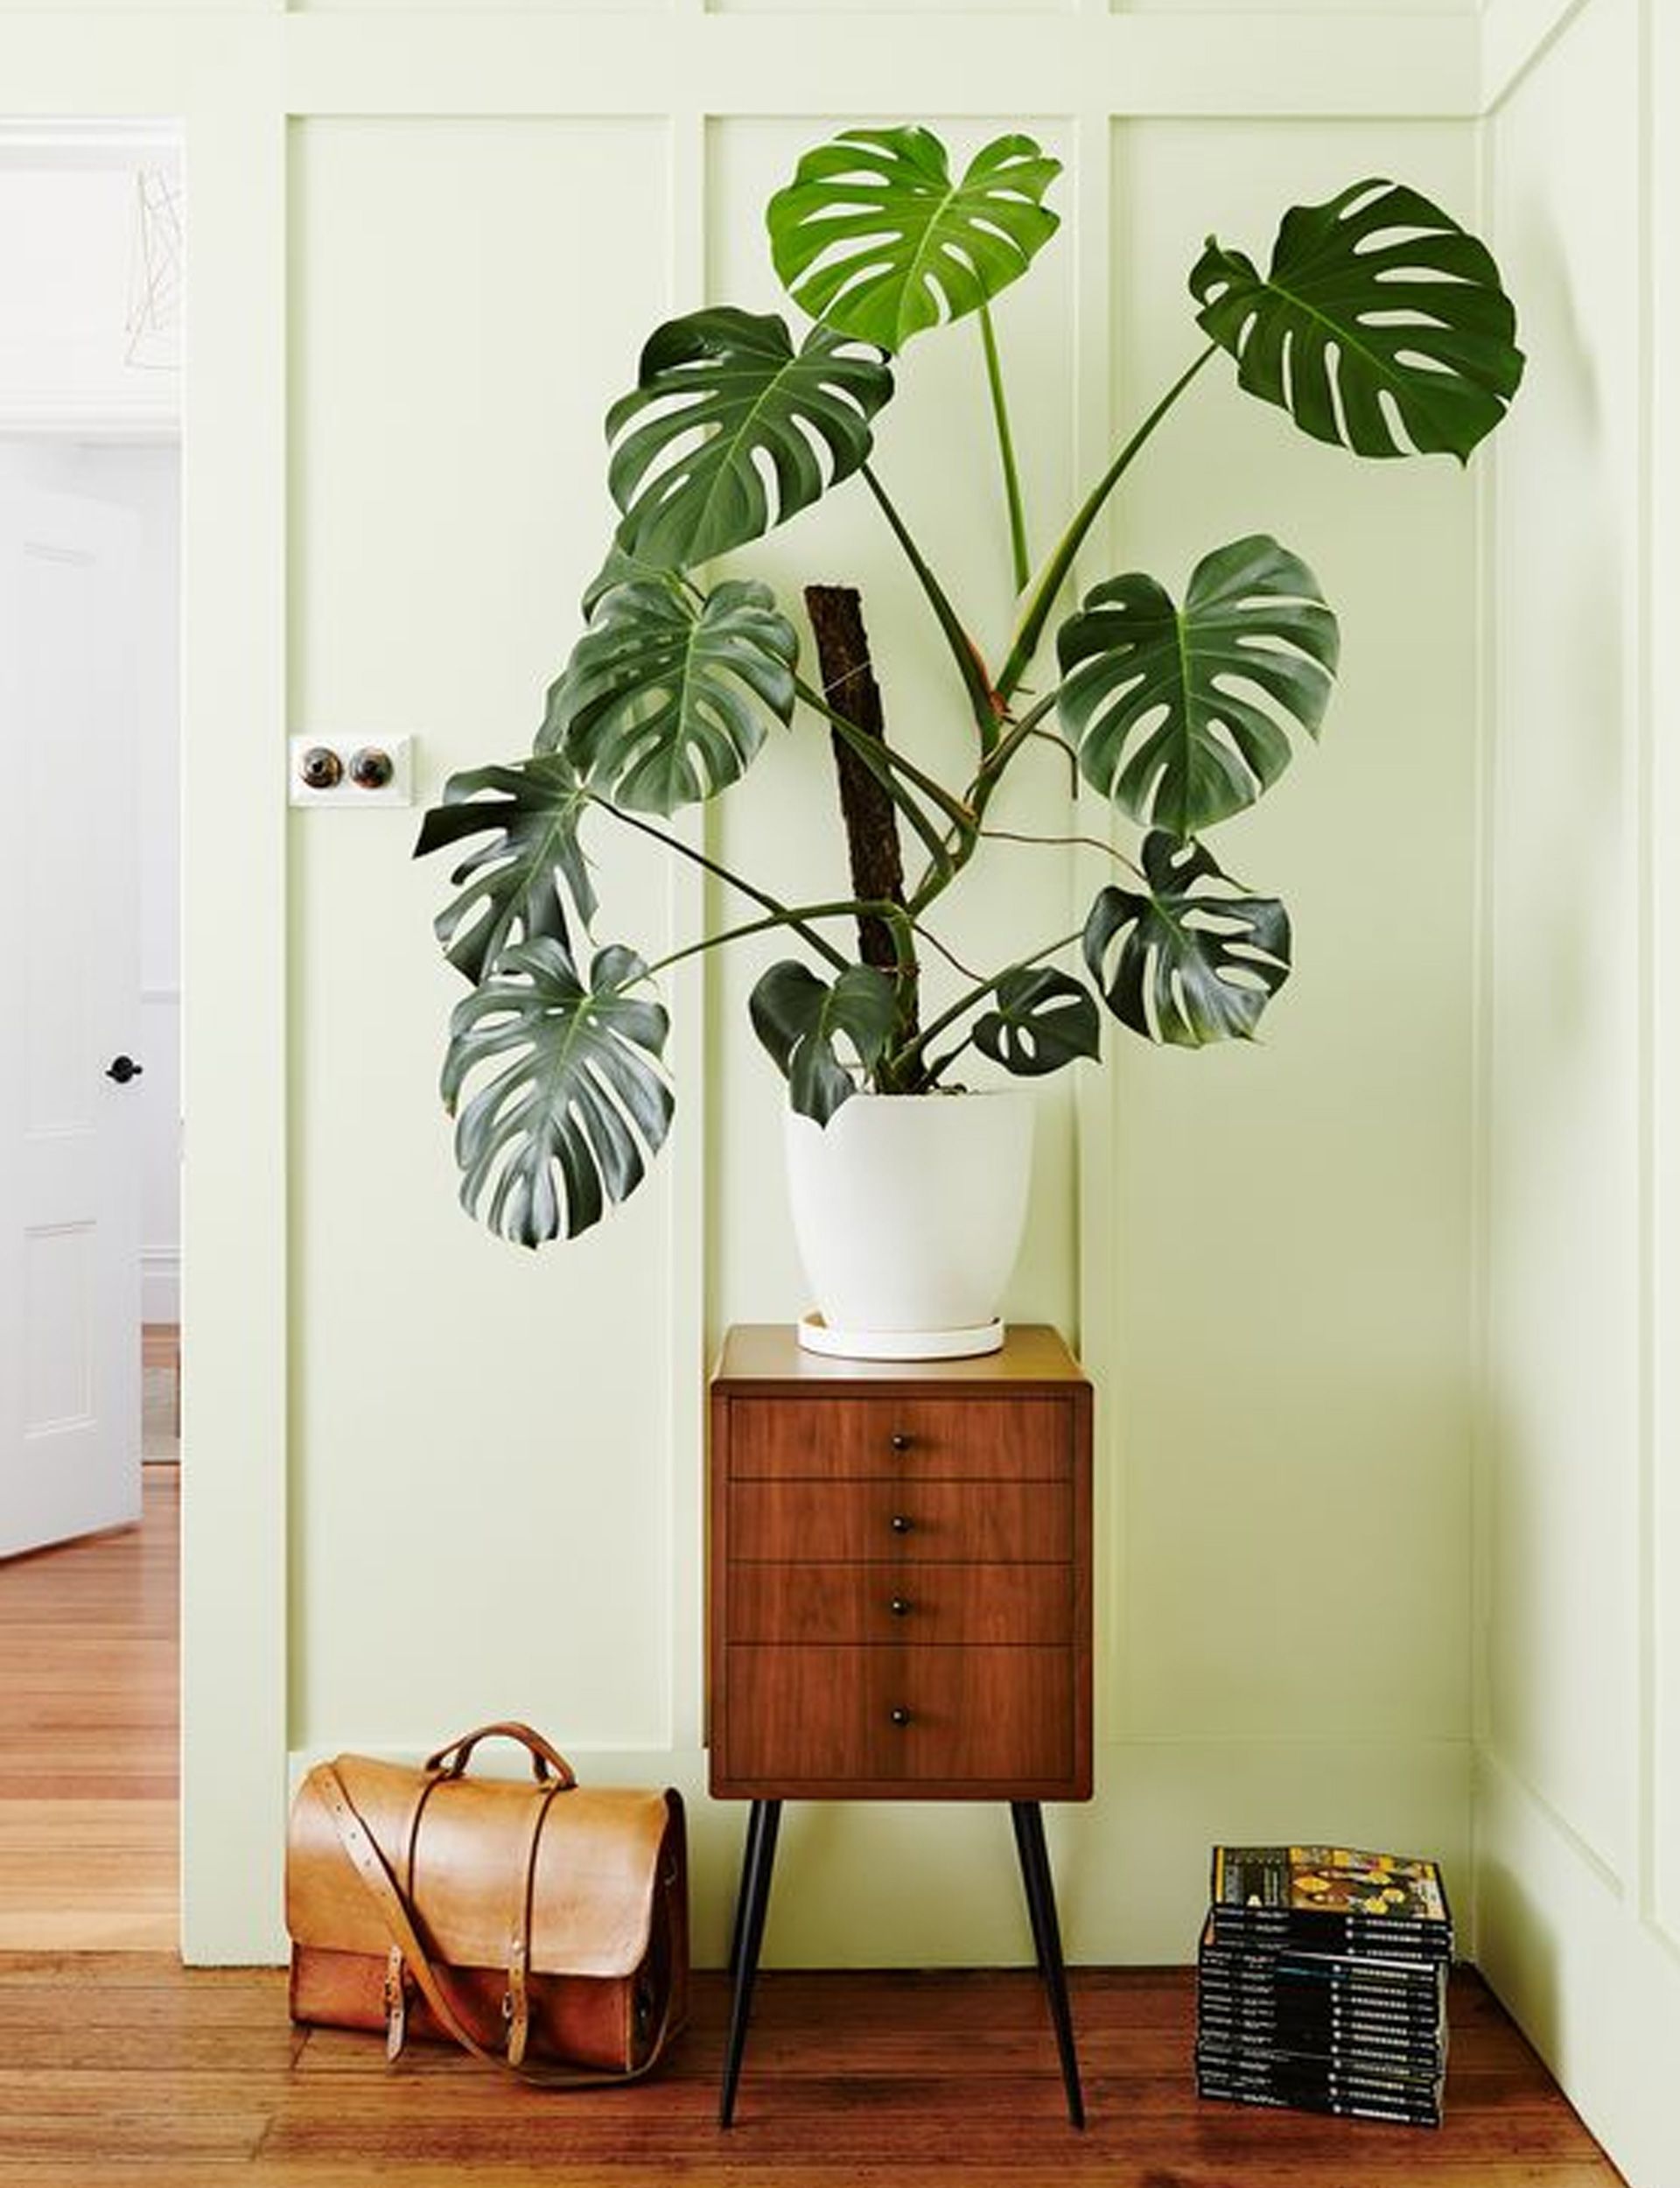 Why indoor trees are the house plant trend to embrace in 2019 -   10 plants Indoor leaves ideas